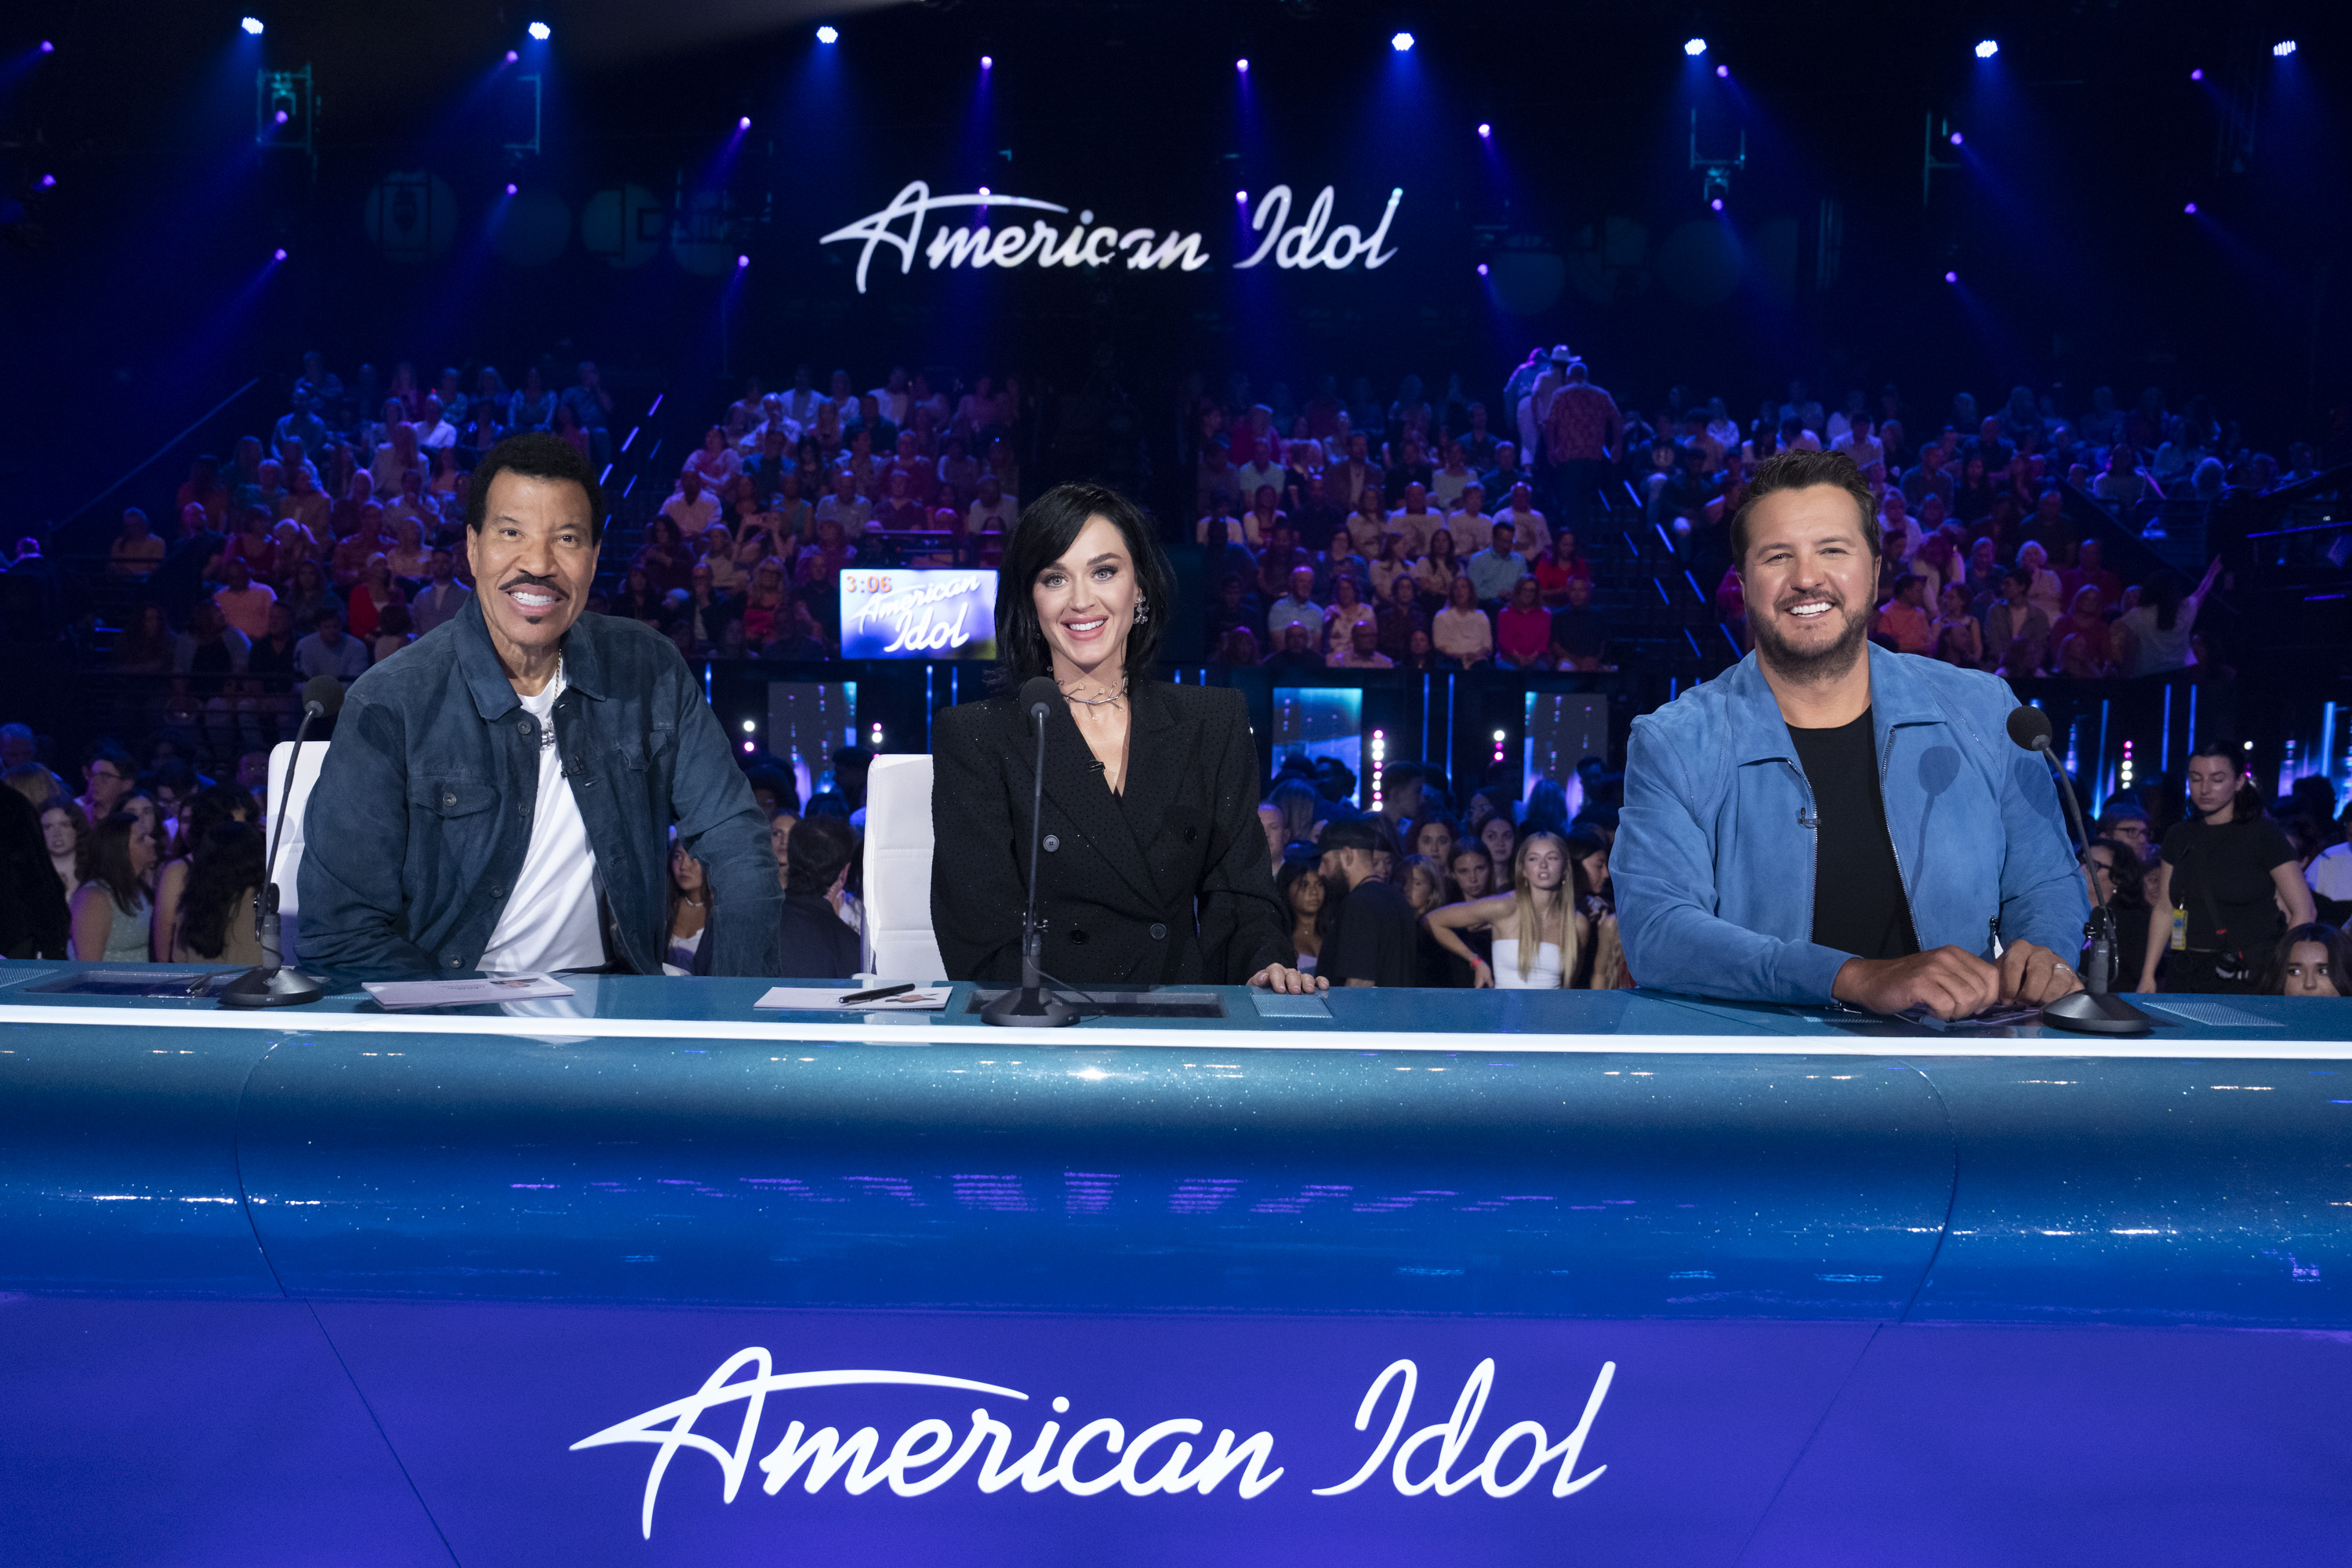 She left American Idol after Season 22 to focus on her music (pictured with judges Lionel Richie and Luke Bryan)